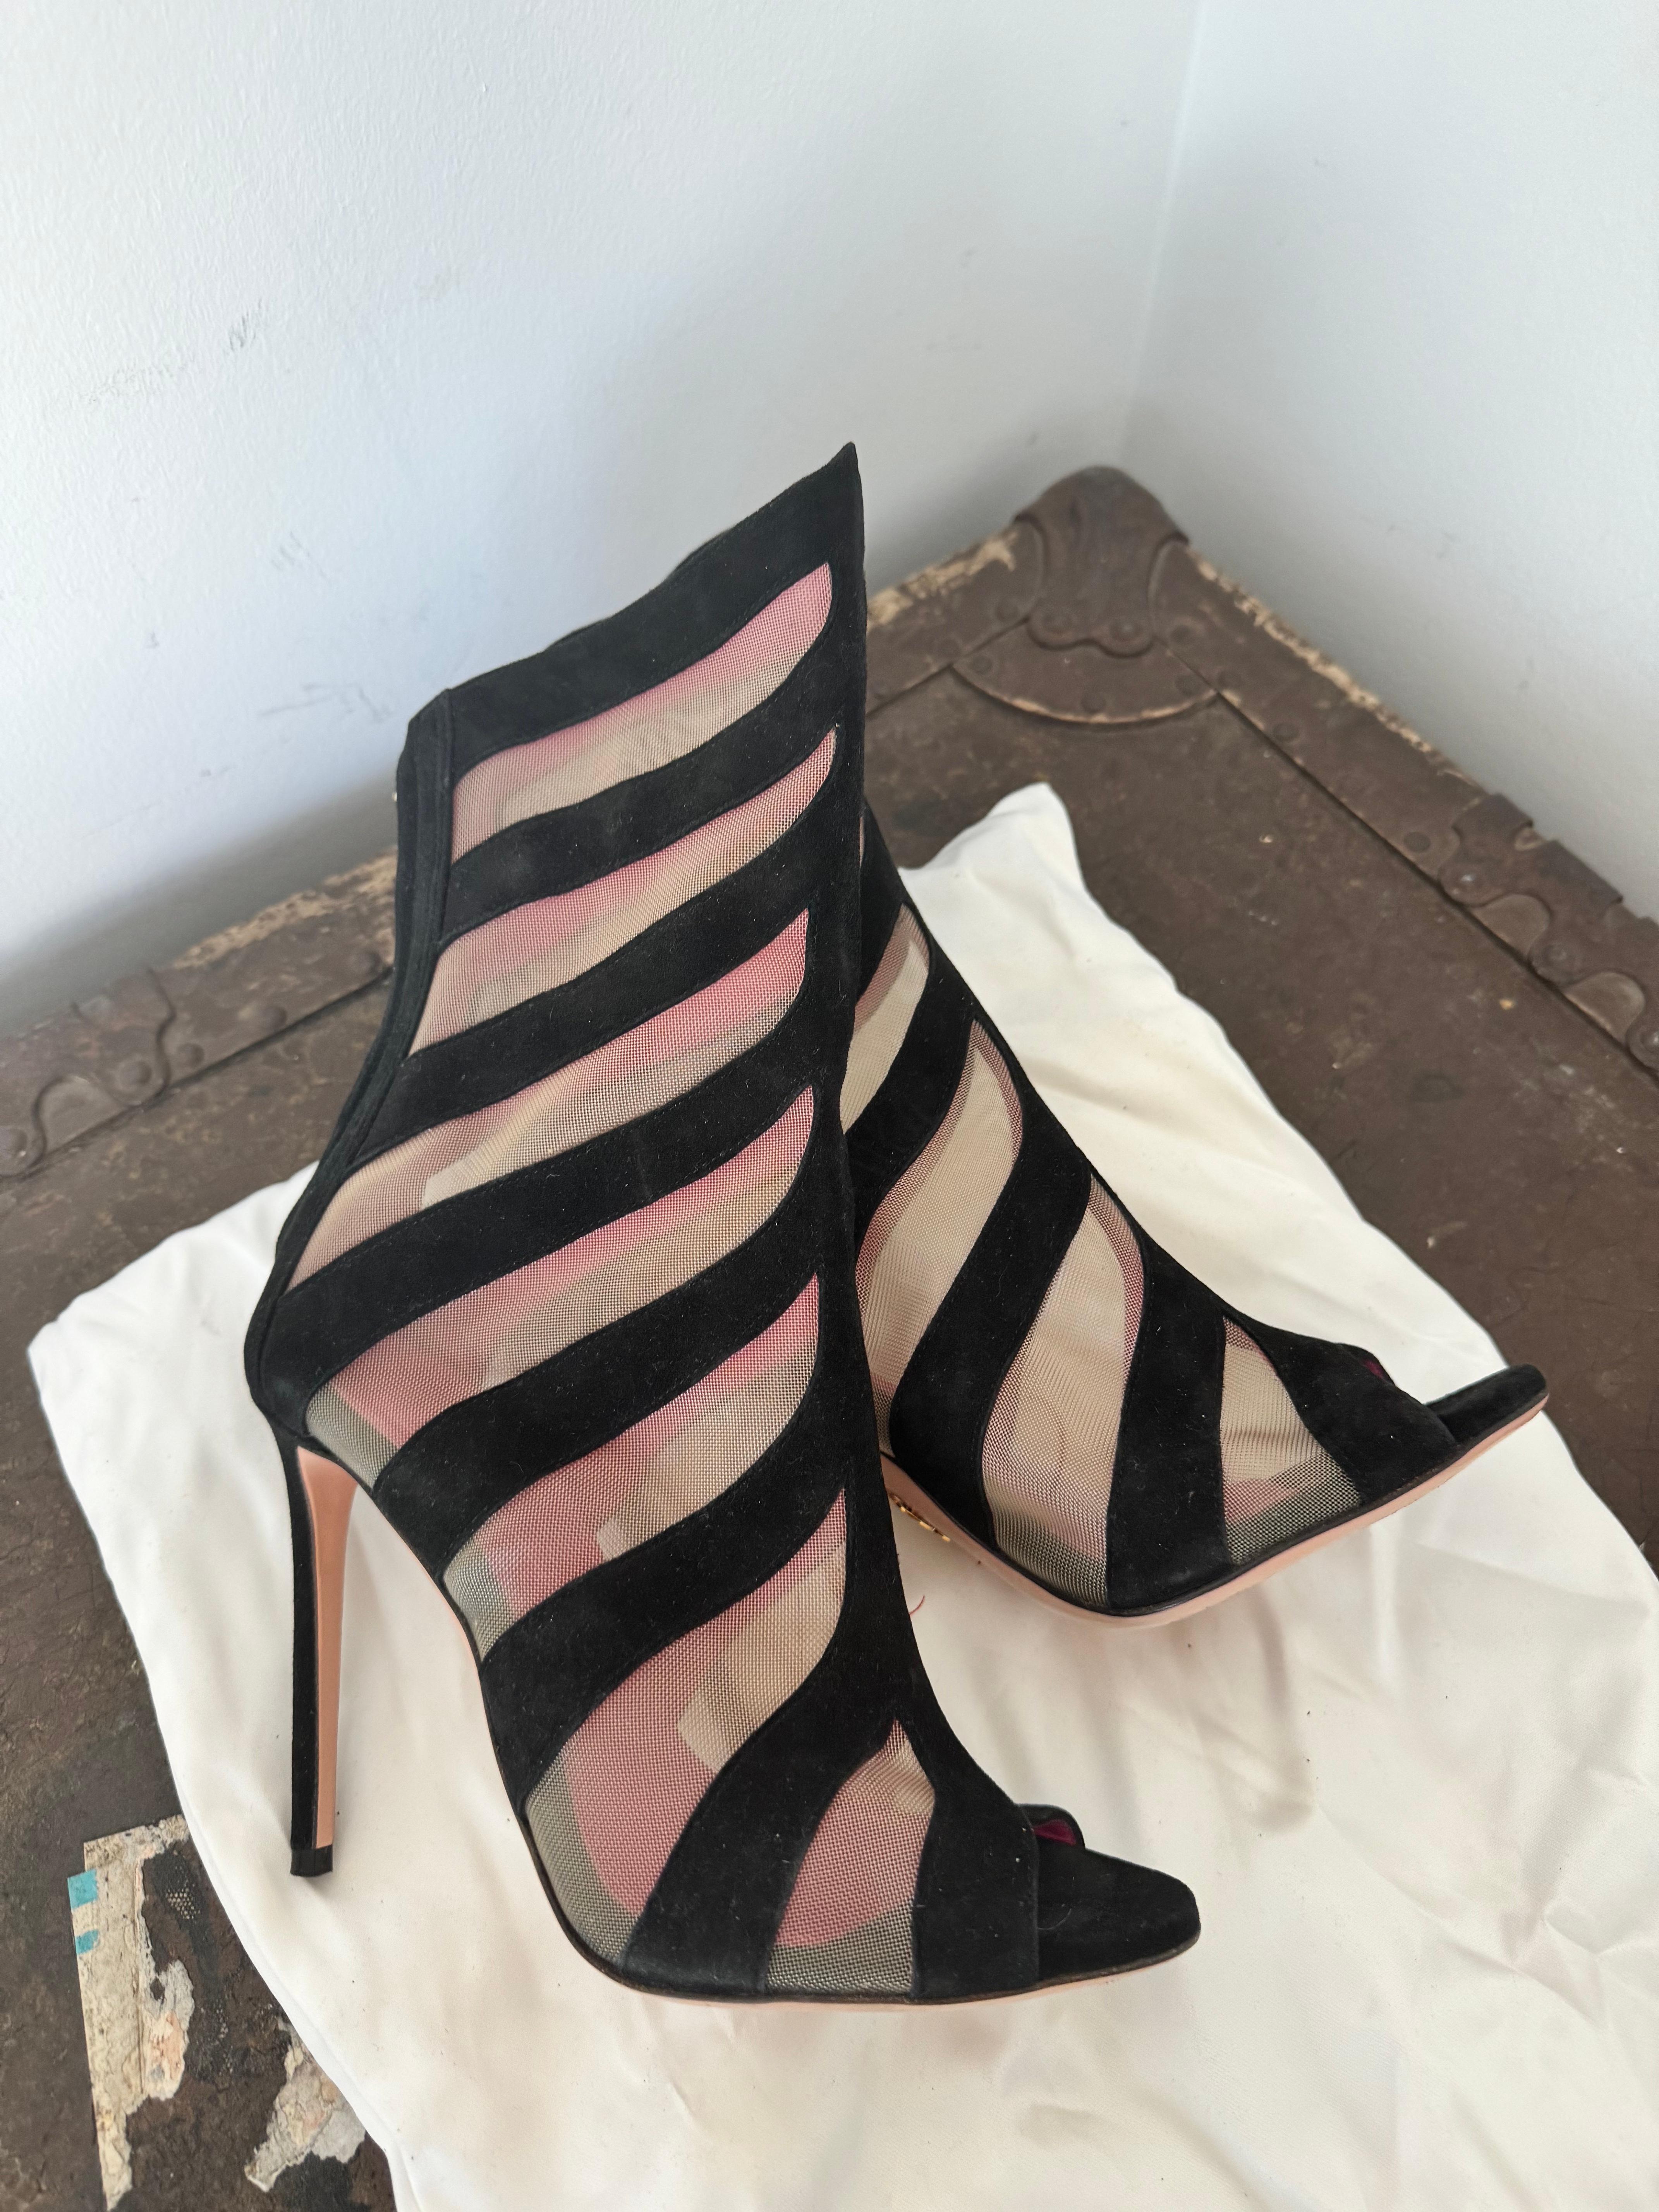 material offers a lightweight and breathable feel while adding a touch of transparency and allure to the shoes. The use of black suede strips adds a luxurious and elegant contrast against the mesh.
Open Toe Design:
The open toe style introduces a